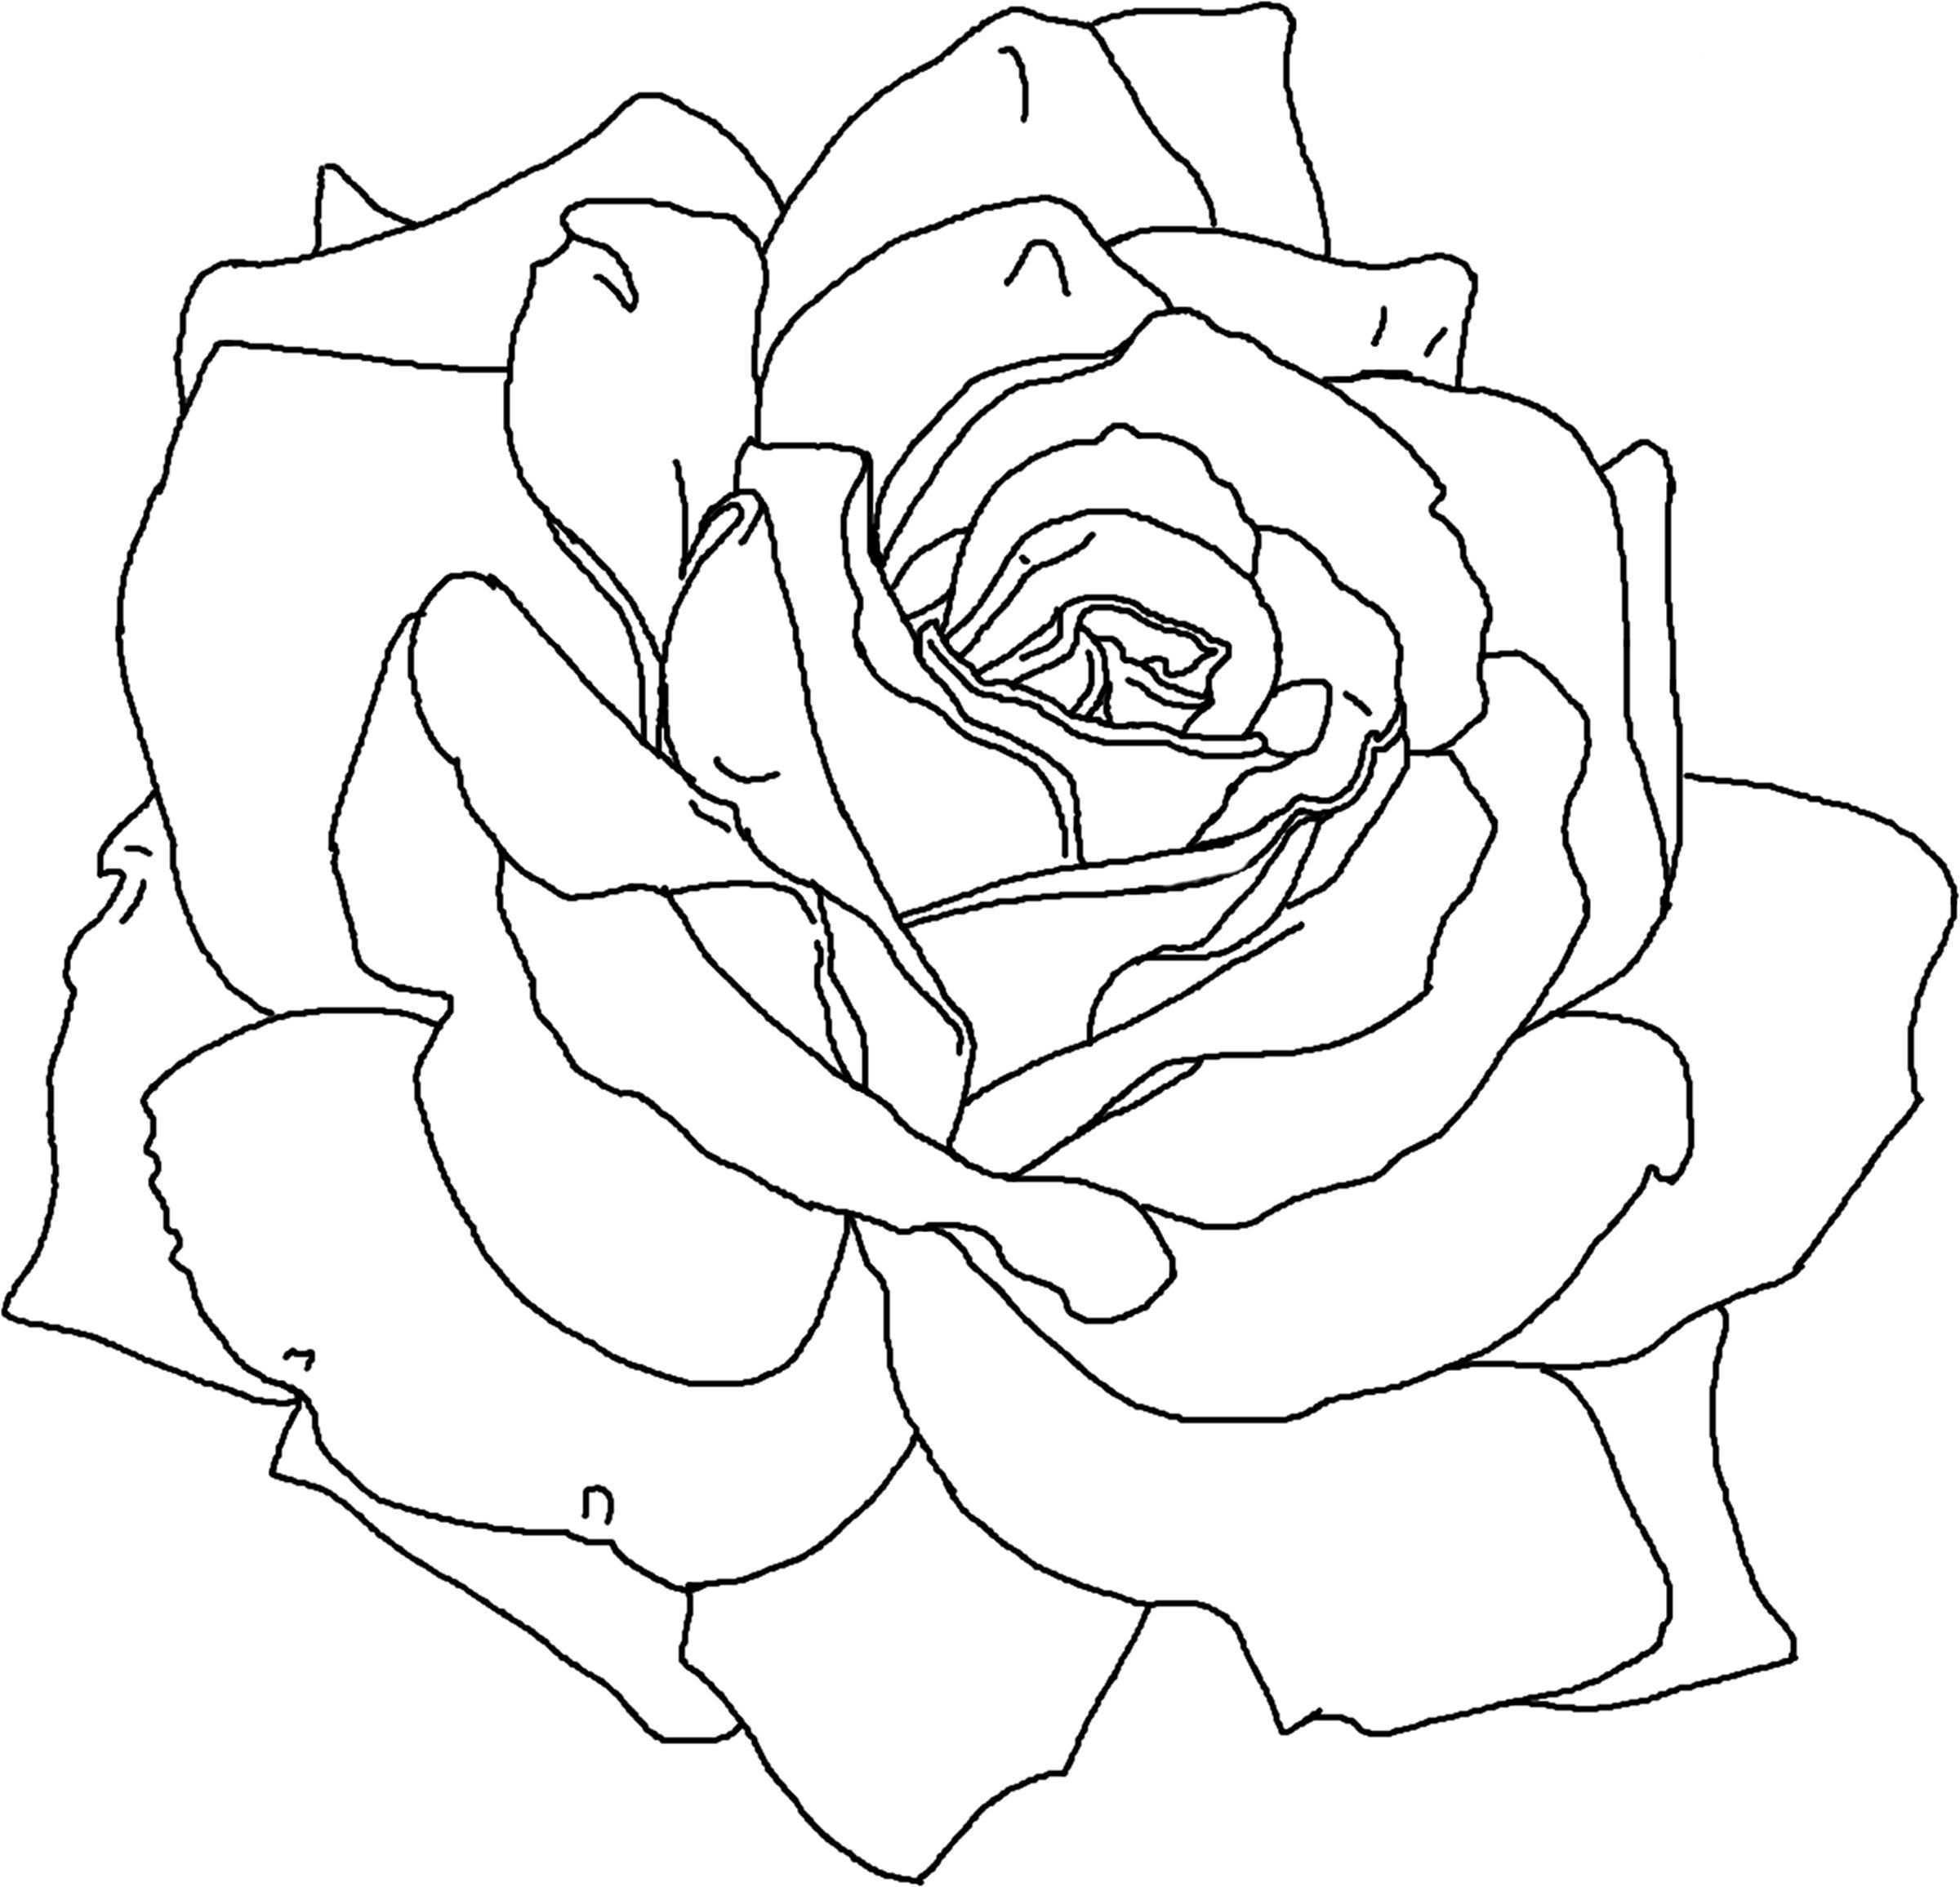 Rose Flower Coloring Page Printable Flower Coloring Pages Rose Coloring Pages Flower